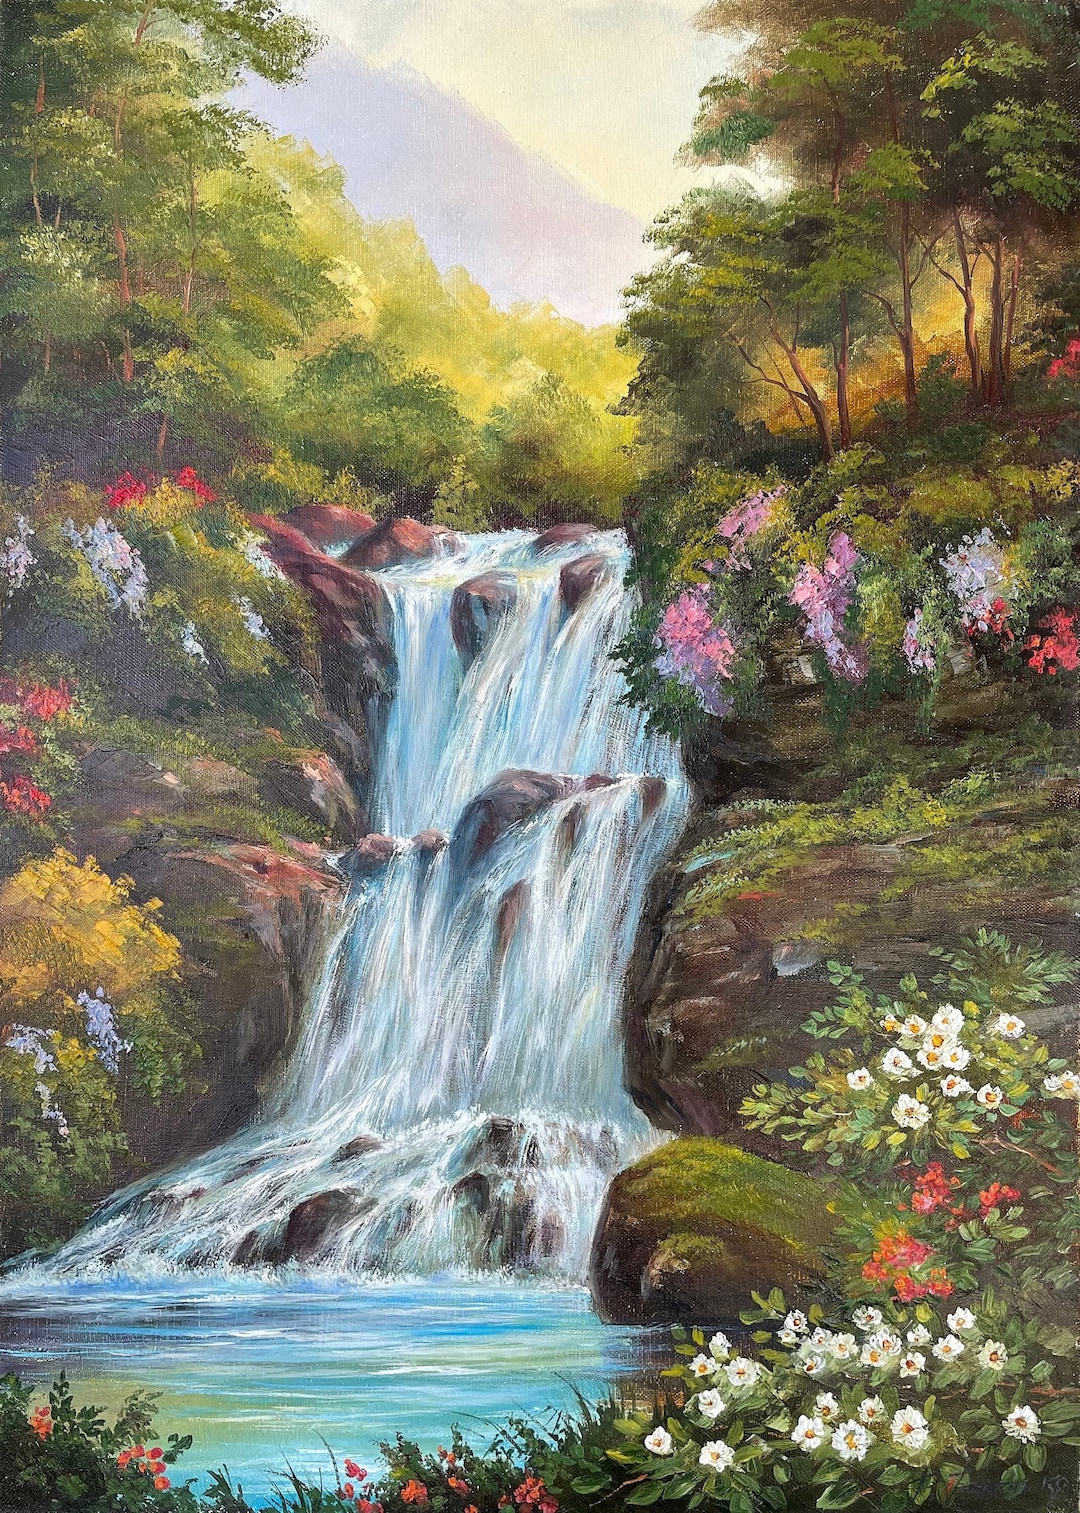 Acrylic painting on canvas board - Chitra Art - Paintings & Prints,  Landscapes & Nature, Waterfalls - ArtPal